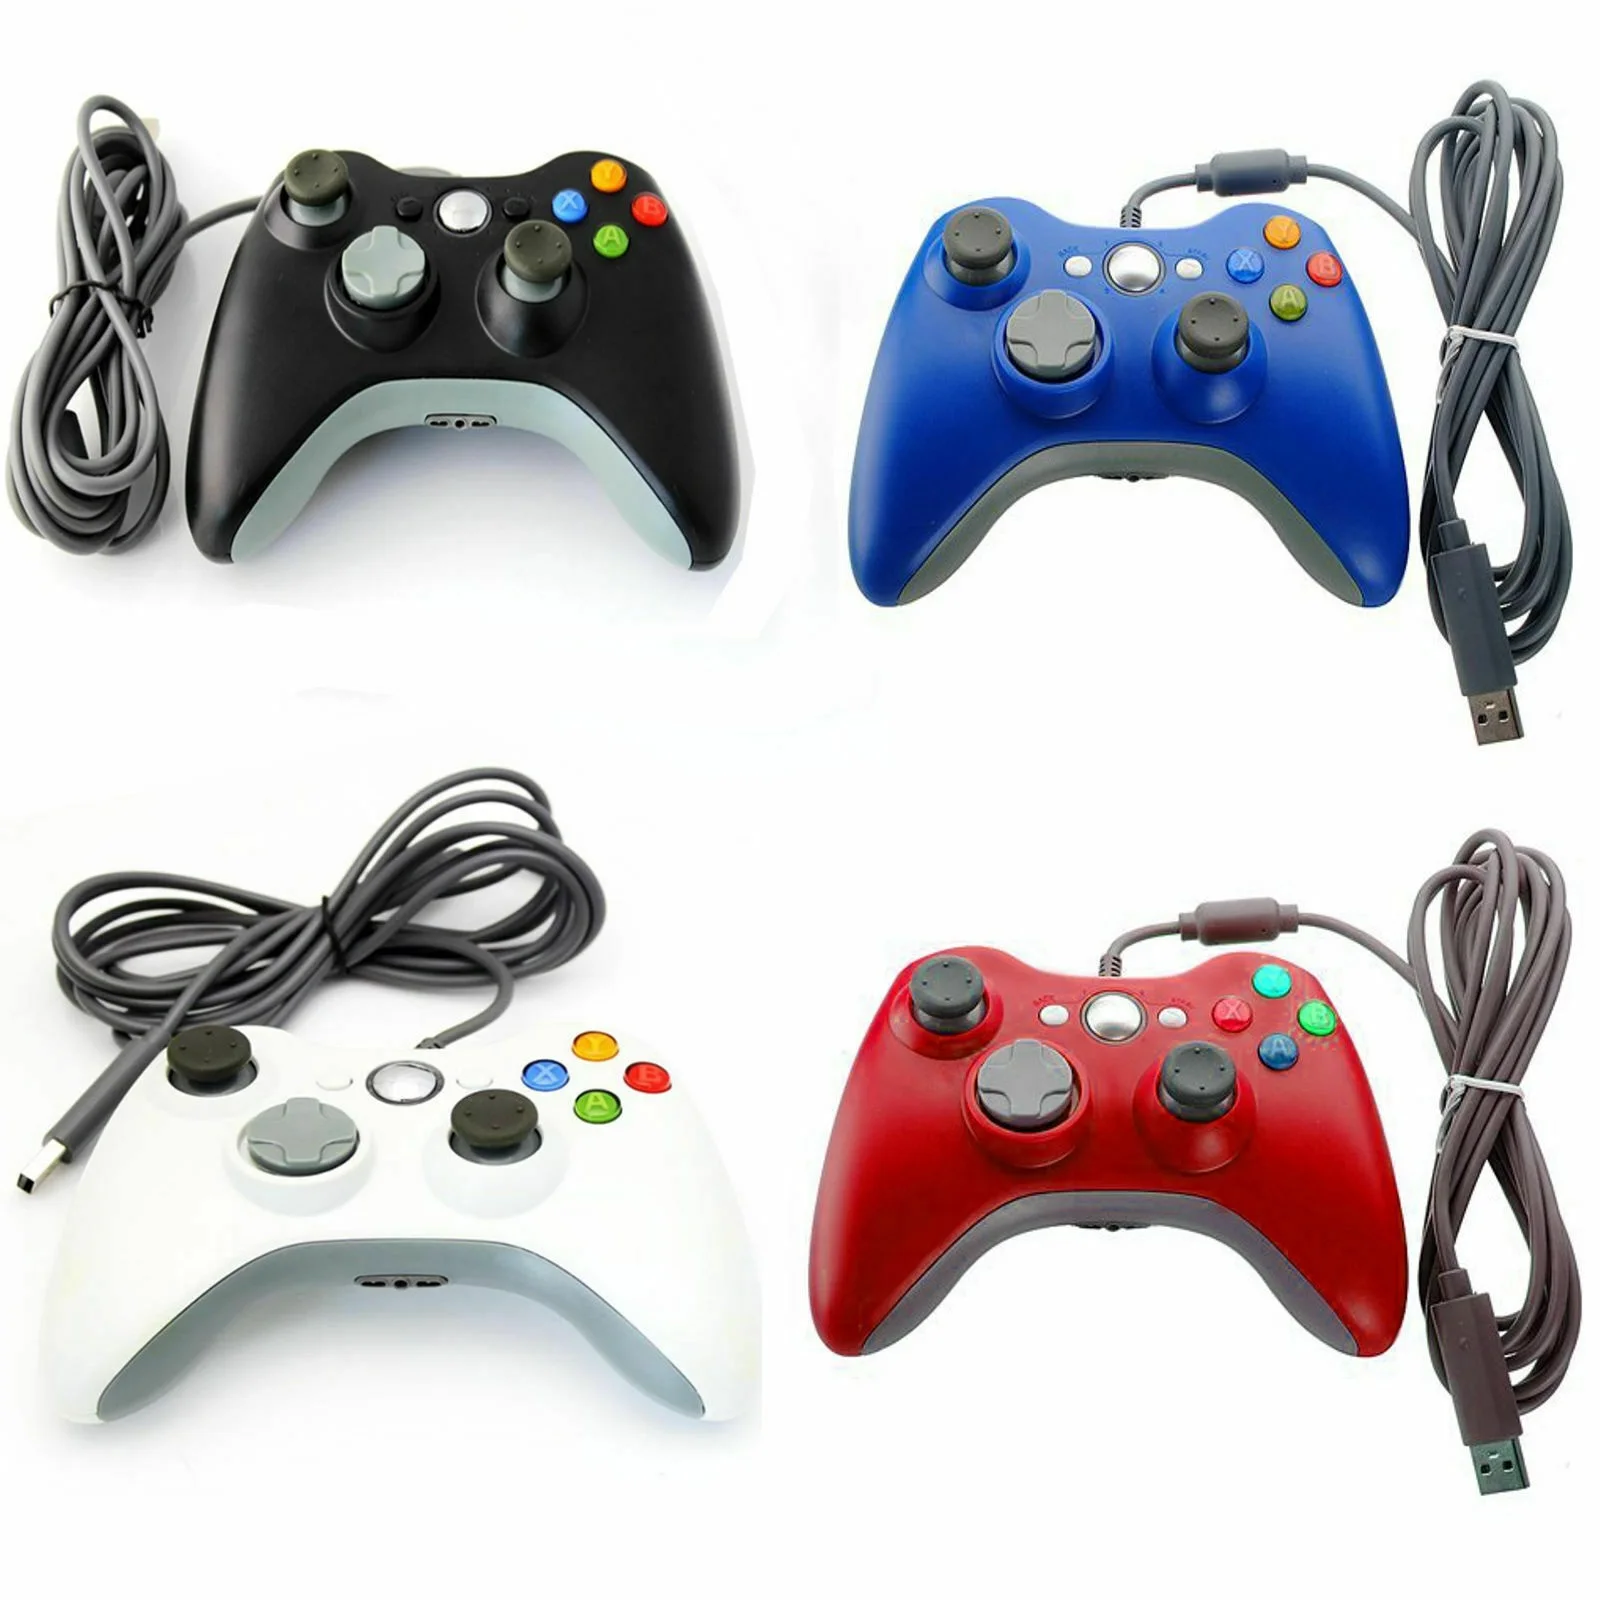 

USB Wired Controller For Xbox 360 Game Accessories Gamepad Joypad Joystick For Microsoft XBOX360 Console PC Cellphone Controle